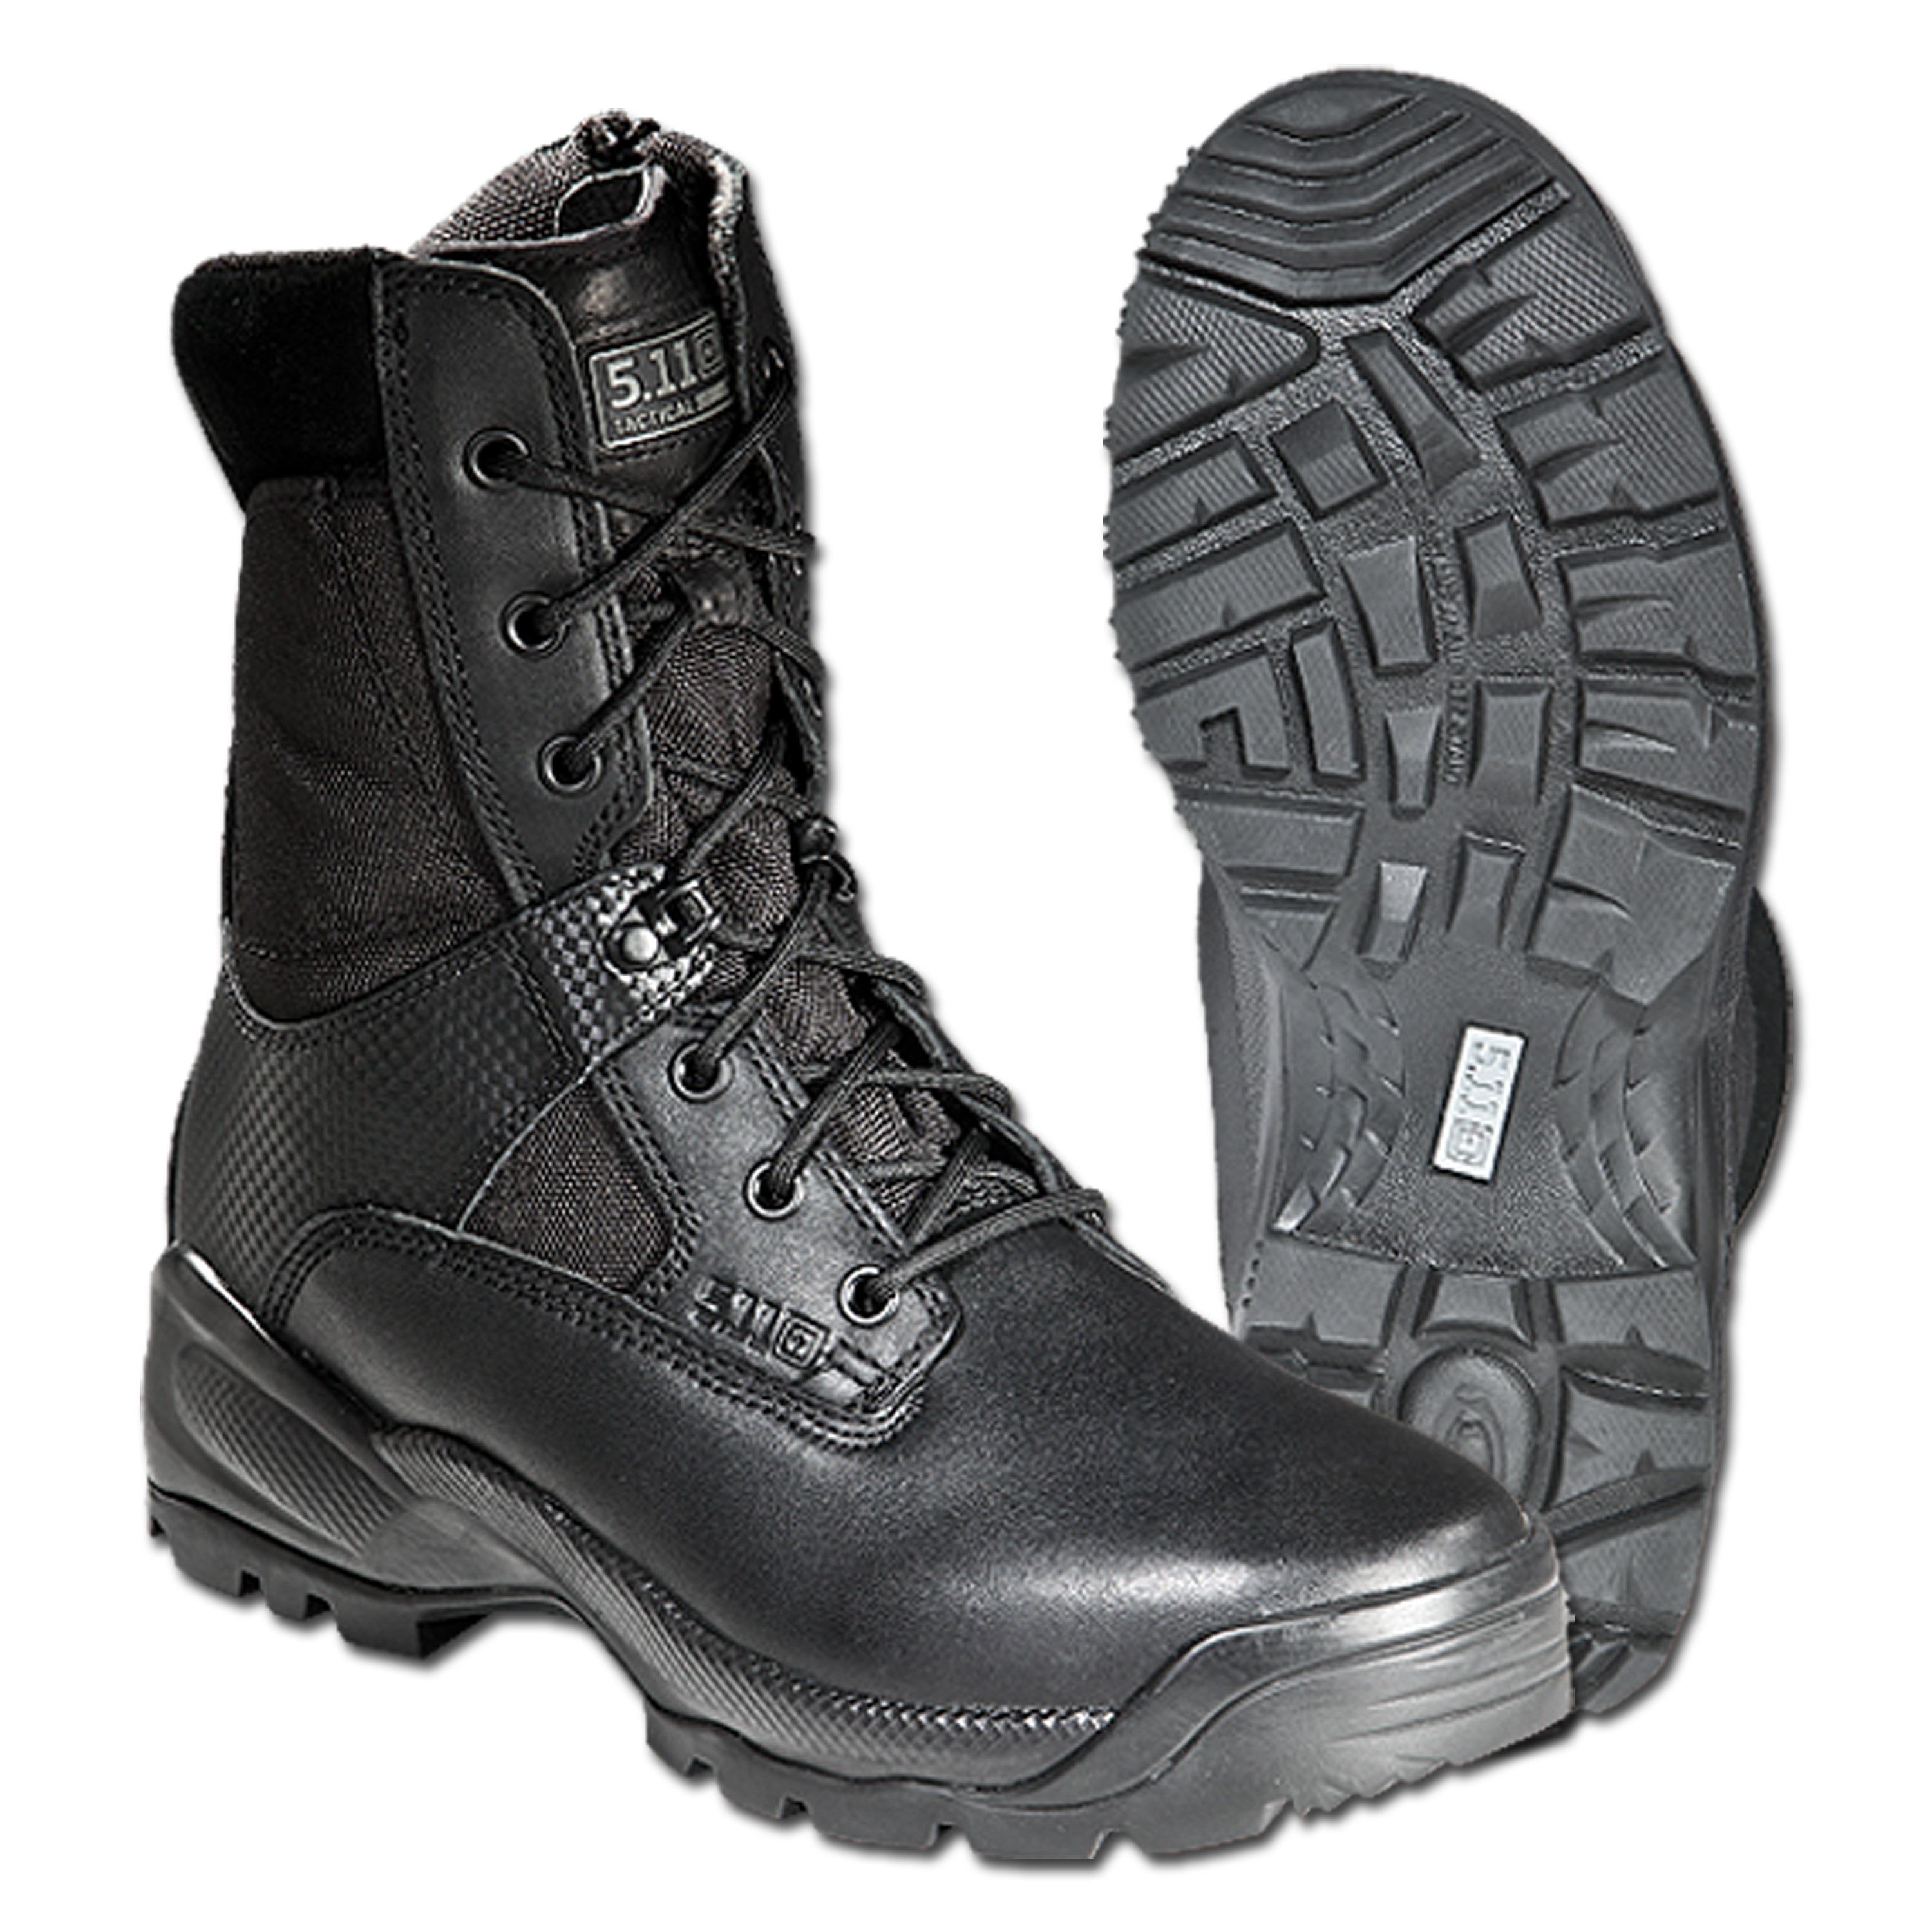 5.11 army boots